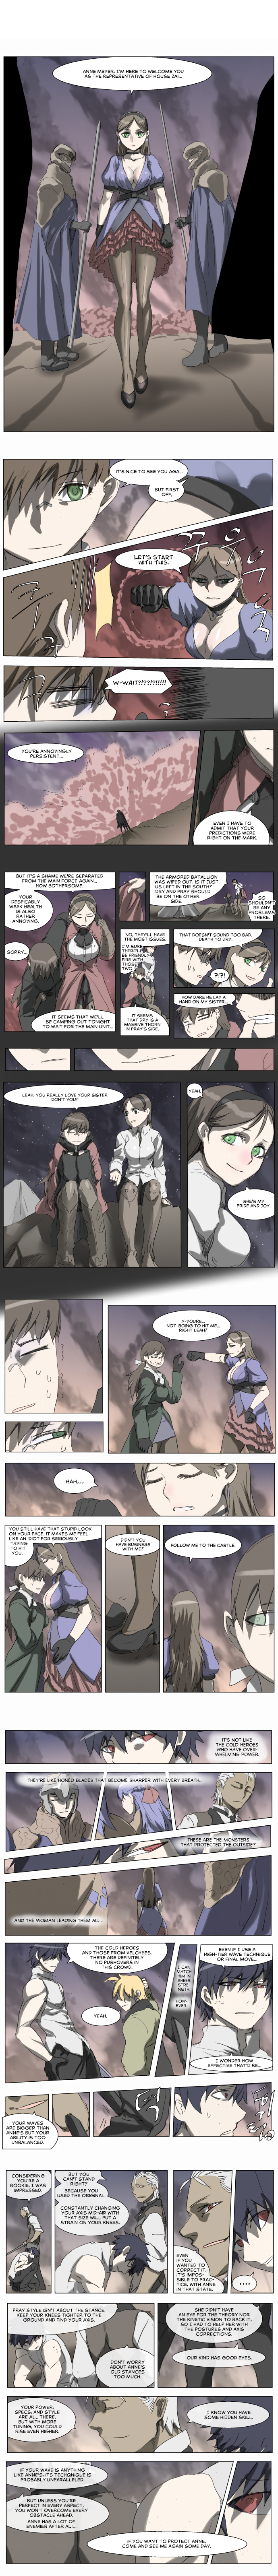 Knight Run Vol.4 Chapter 204: Knight Fall - Part 8 | Sister - Picture 1